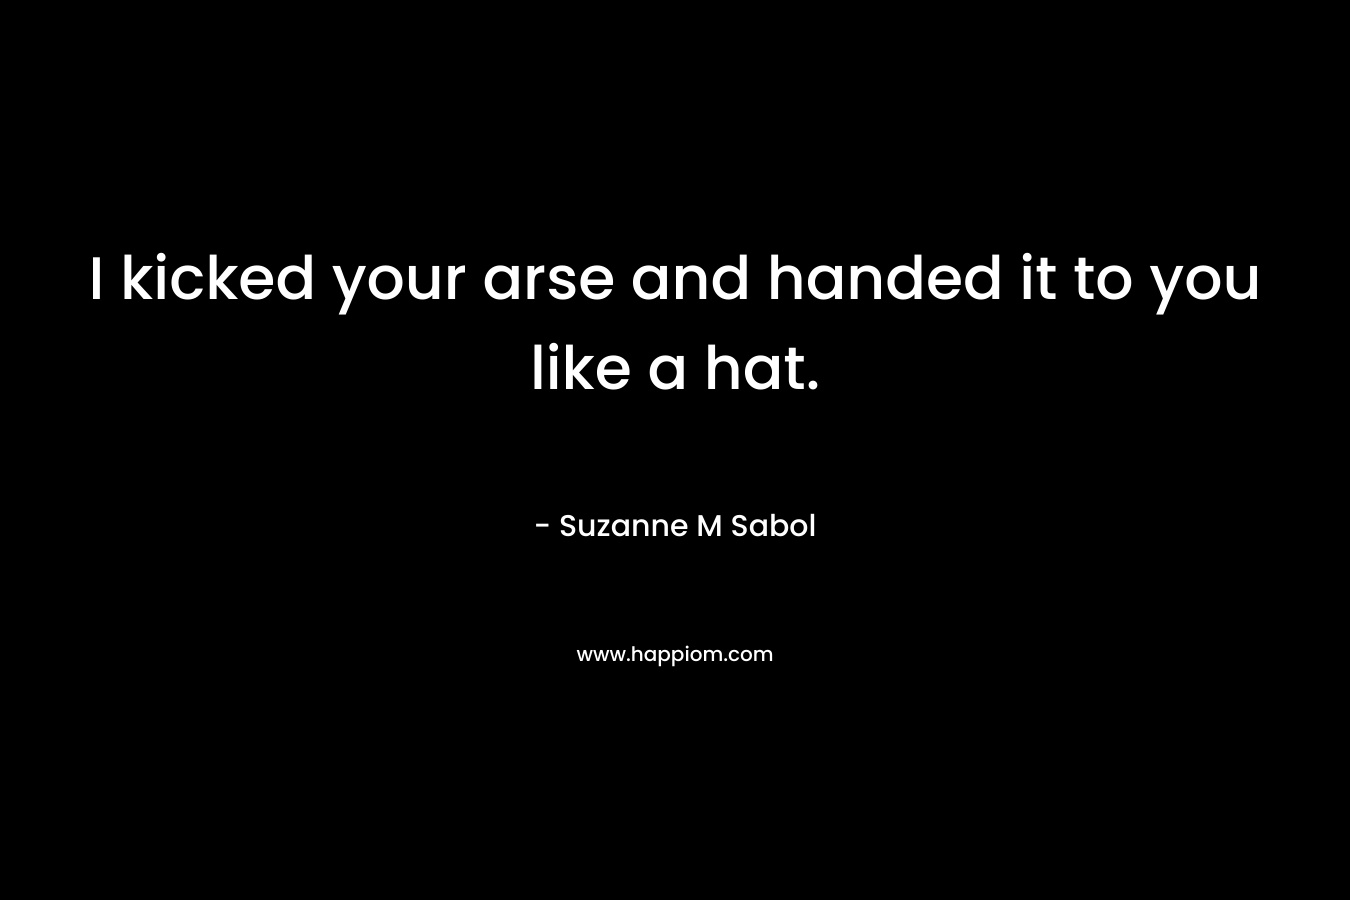 I kicked your arse and handed it to you like a hat. – Suzanne M Sabol